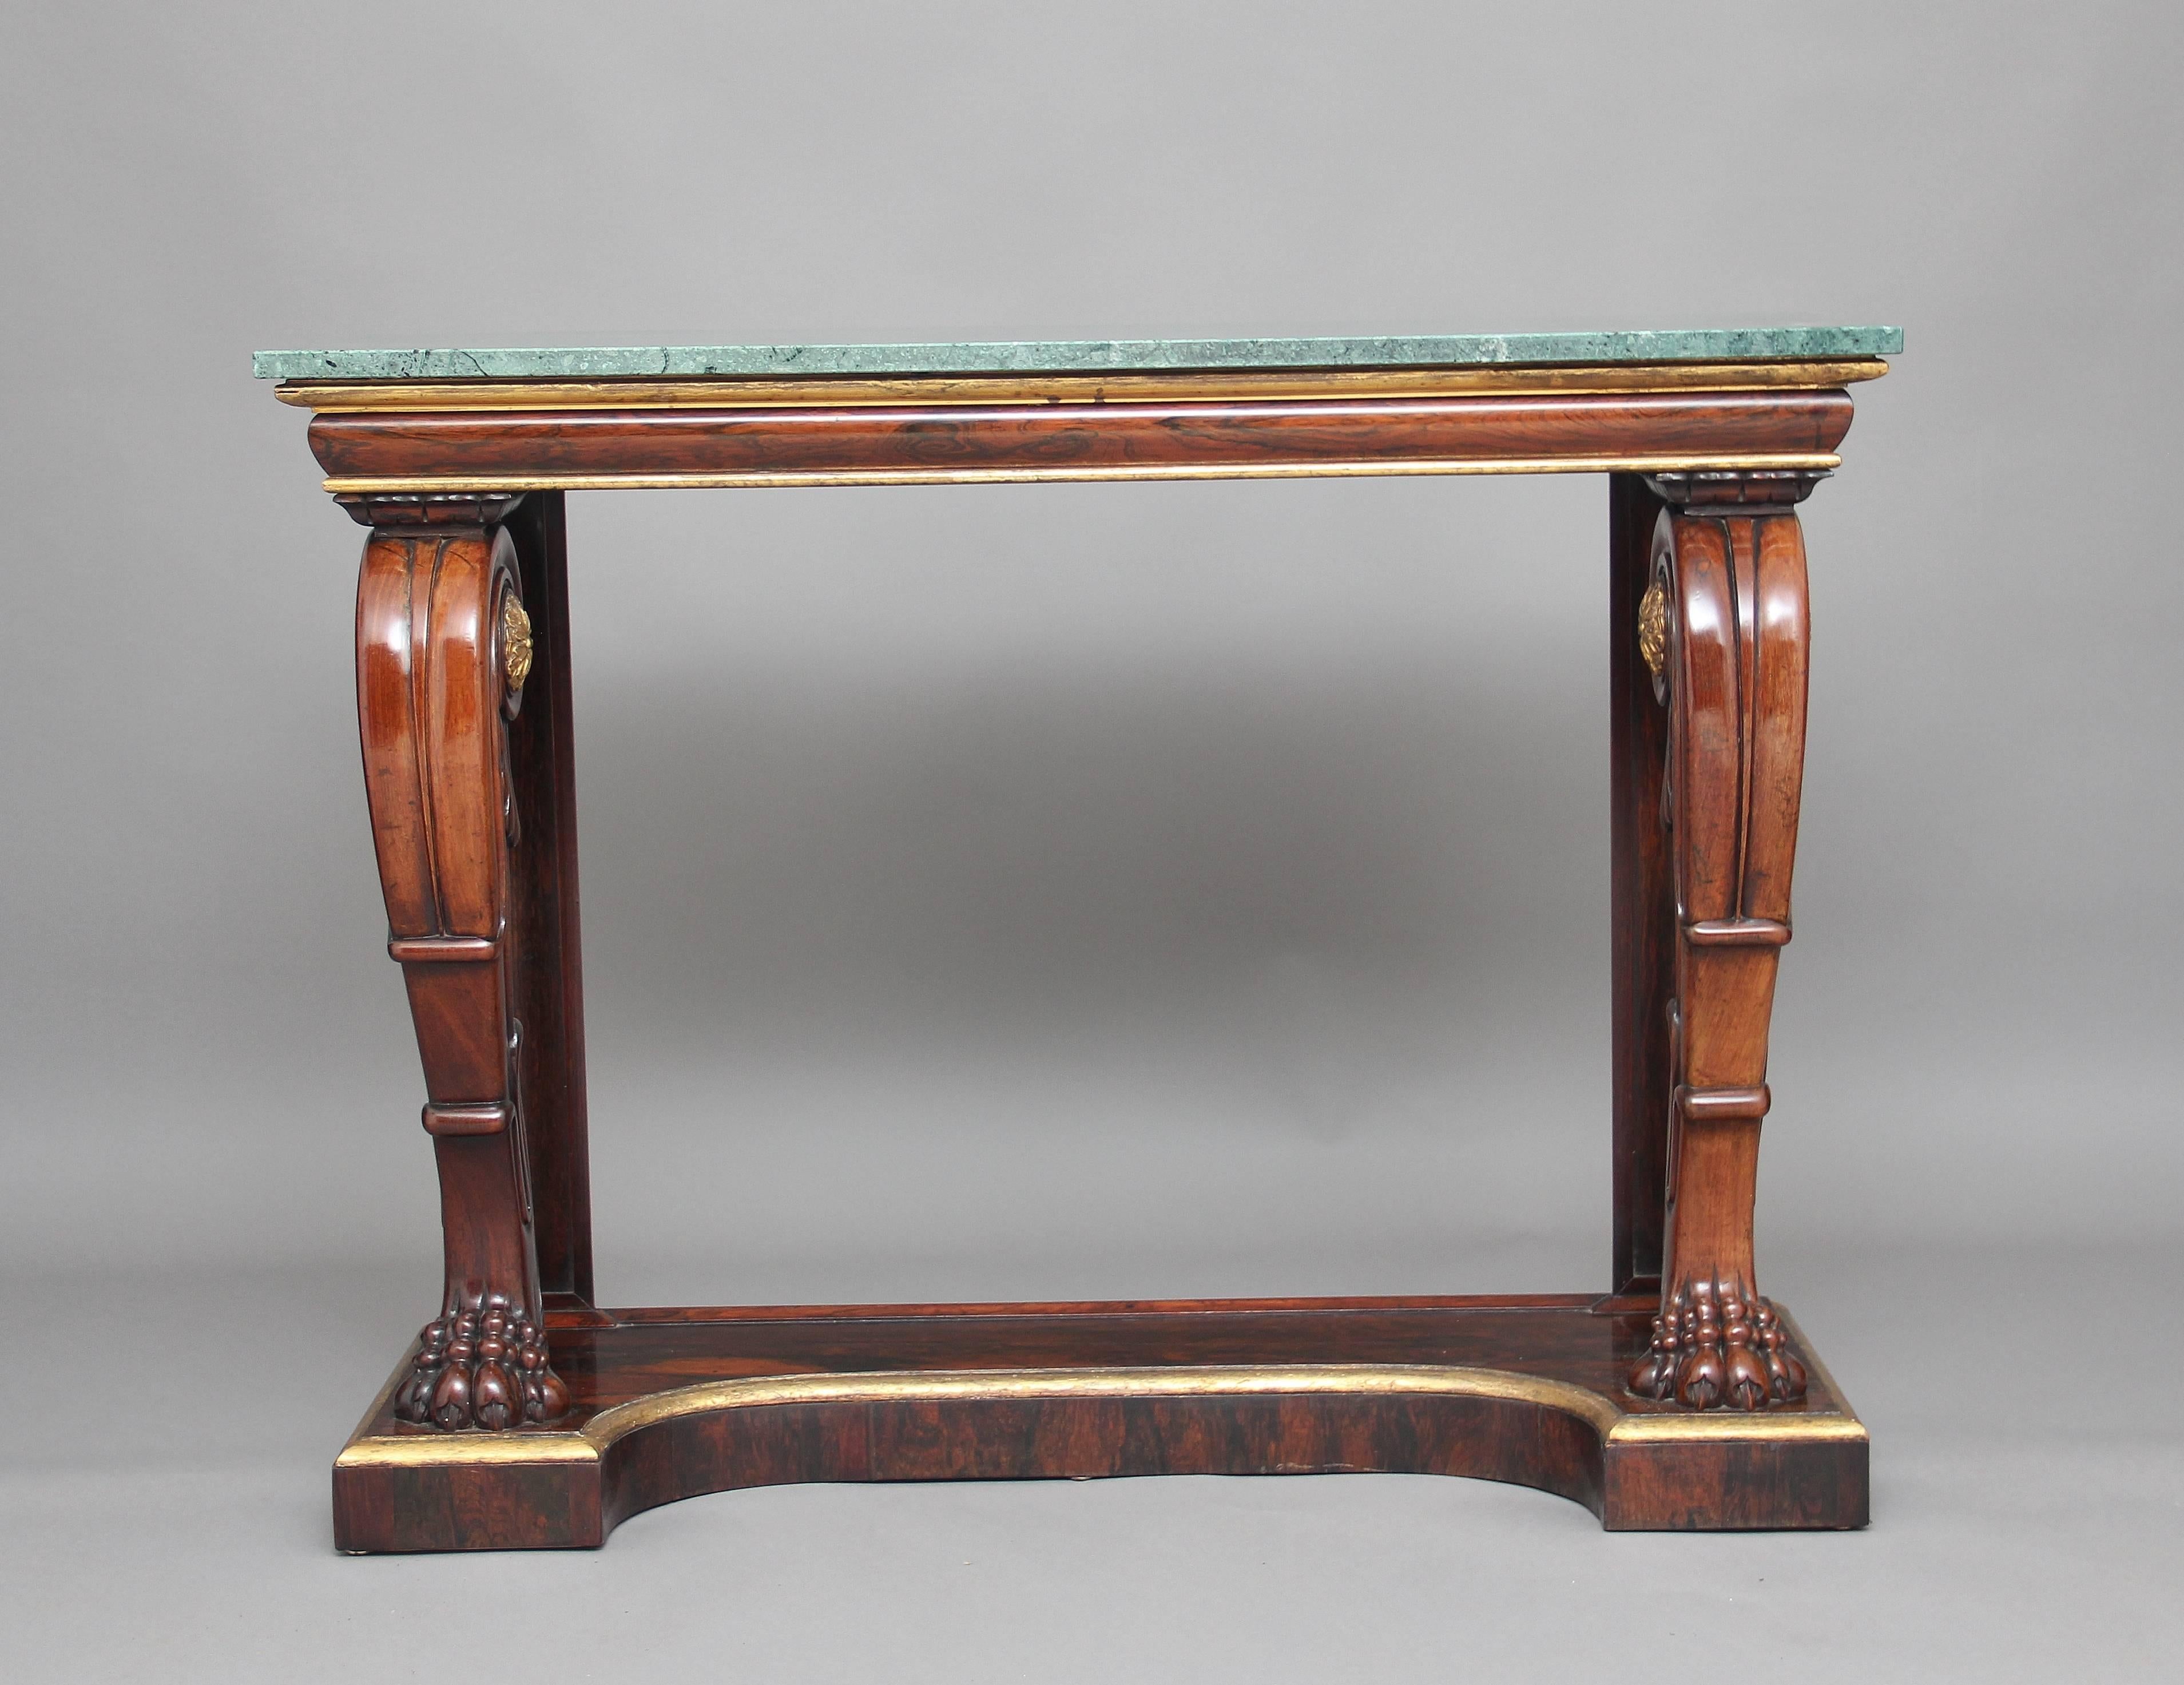 Early 19th century rosewood console table with a turquoise marble top, the frieze below having a gilt moulded edge, supported on carved bold cabriole front supports with claw feet decorated with carved giltwood patraes, standing on a gilded and